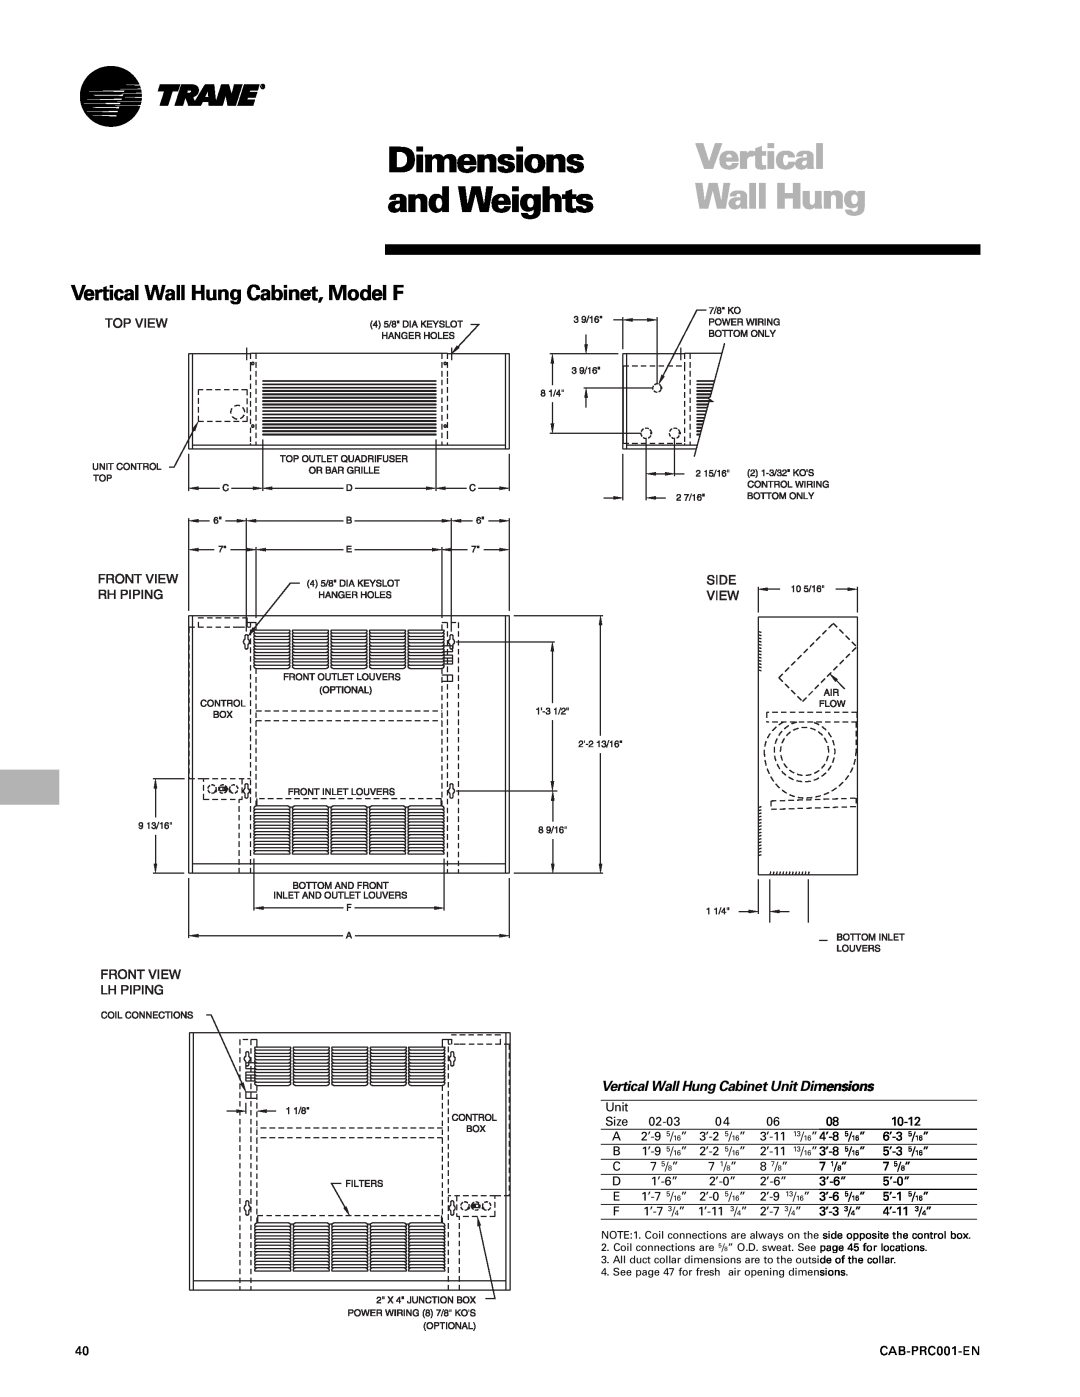 Trane CAB-PRC001-EN manual Dimensions, and Weights, Vertical Wall Hung Cabinet, Model F 